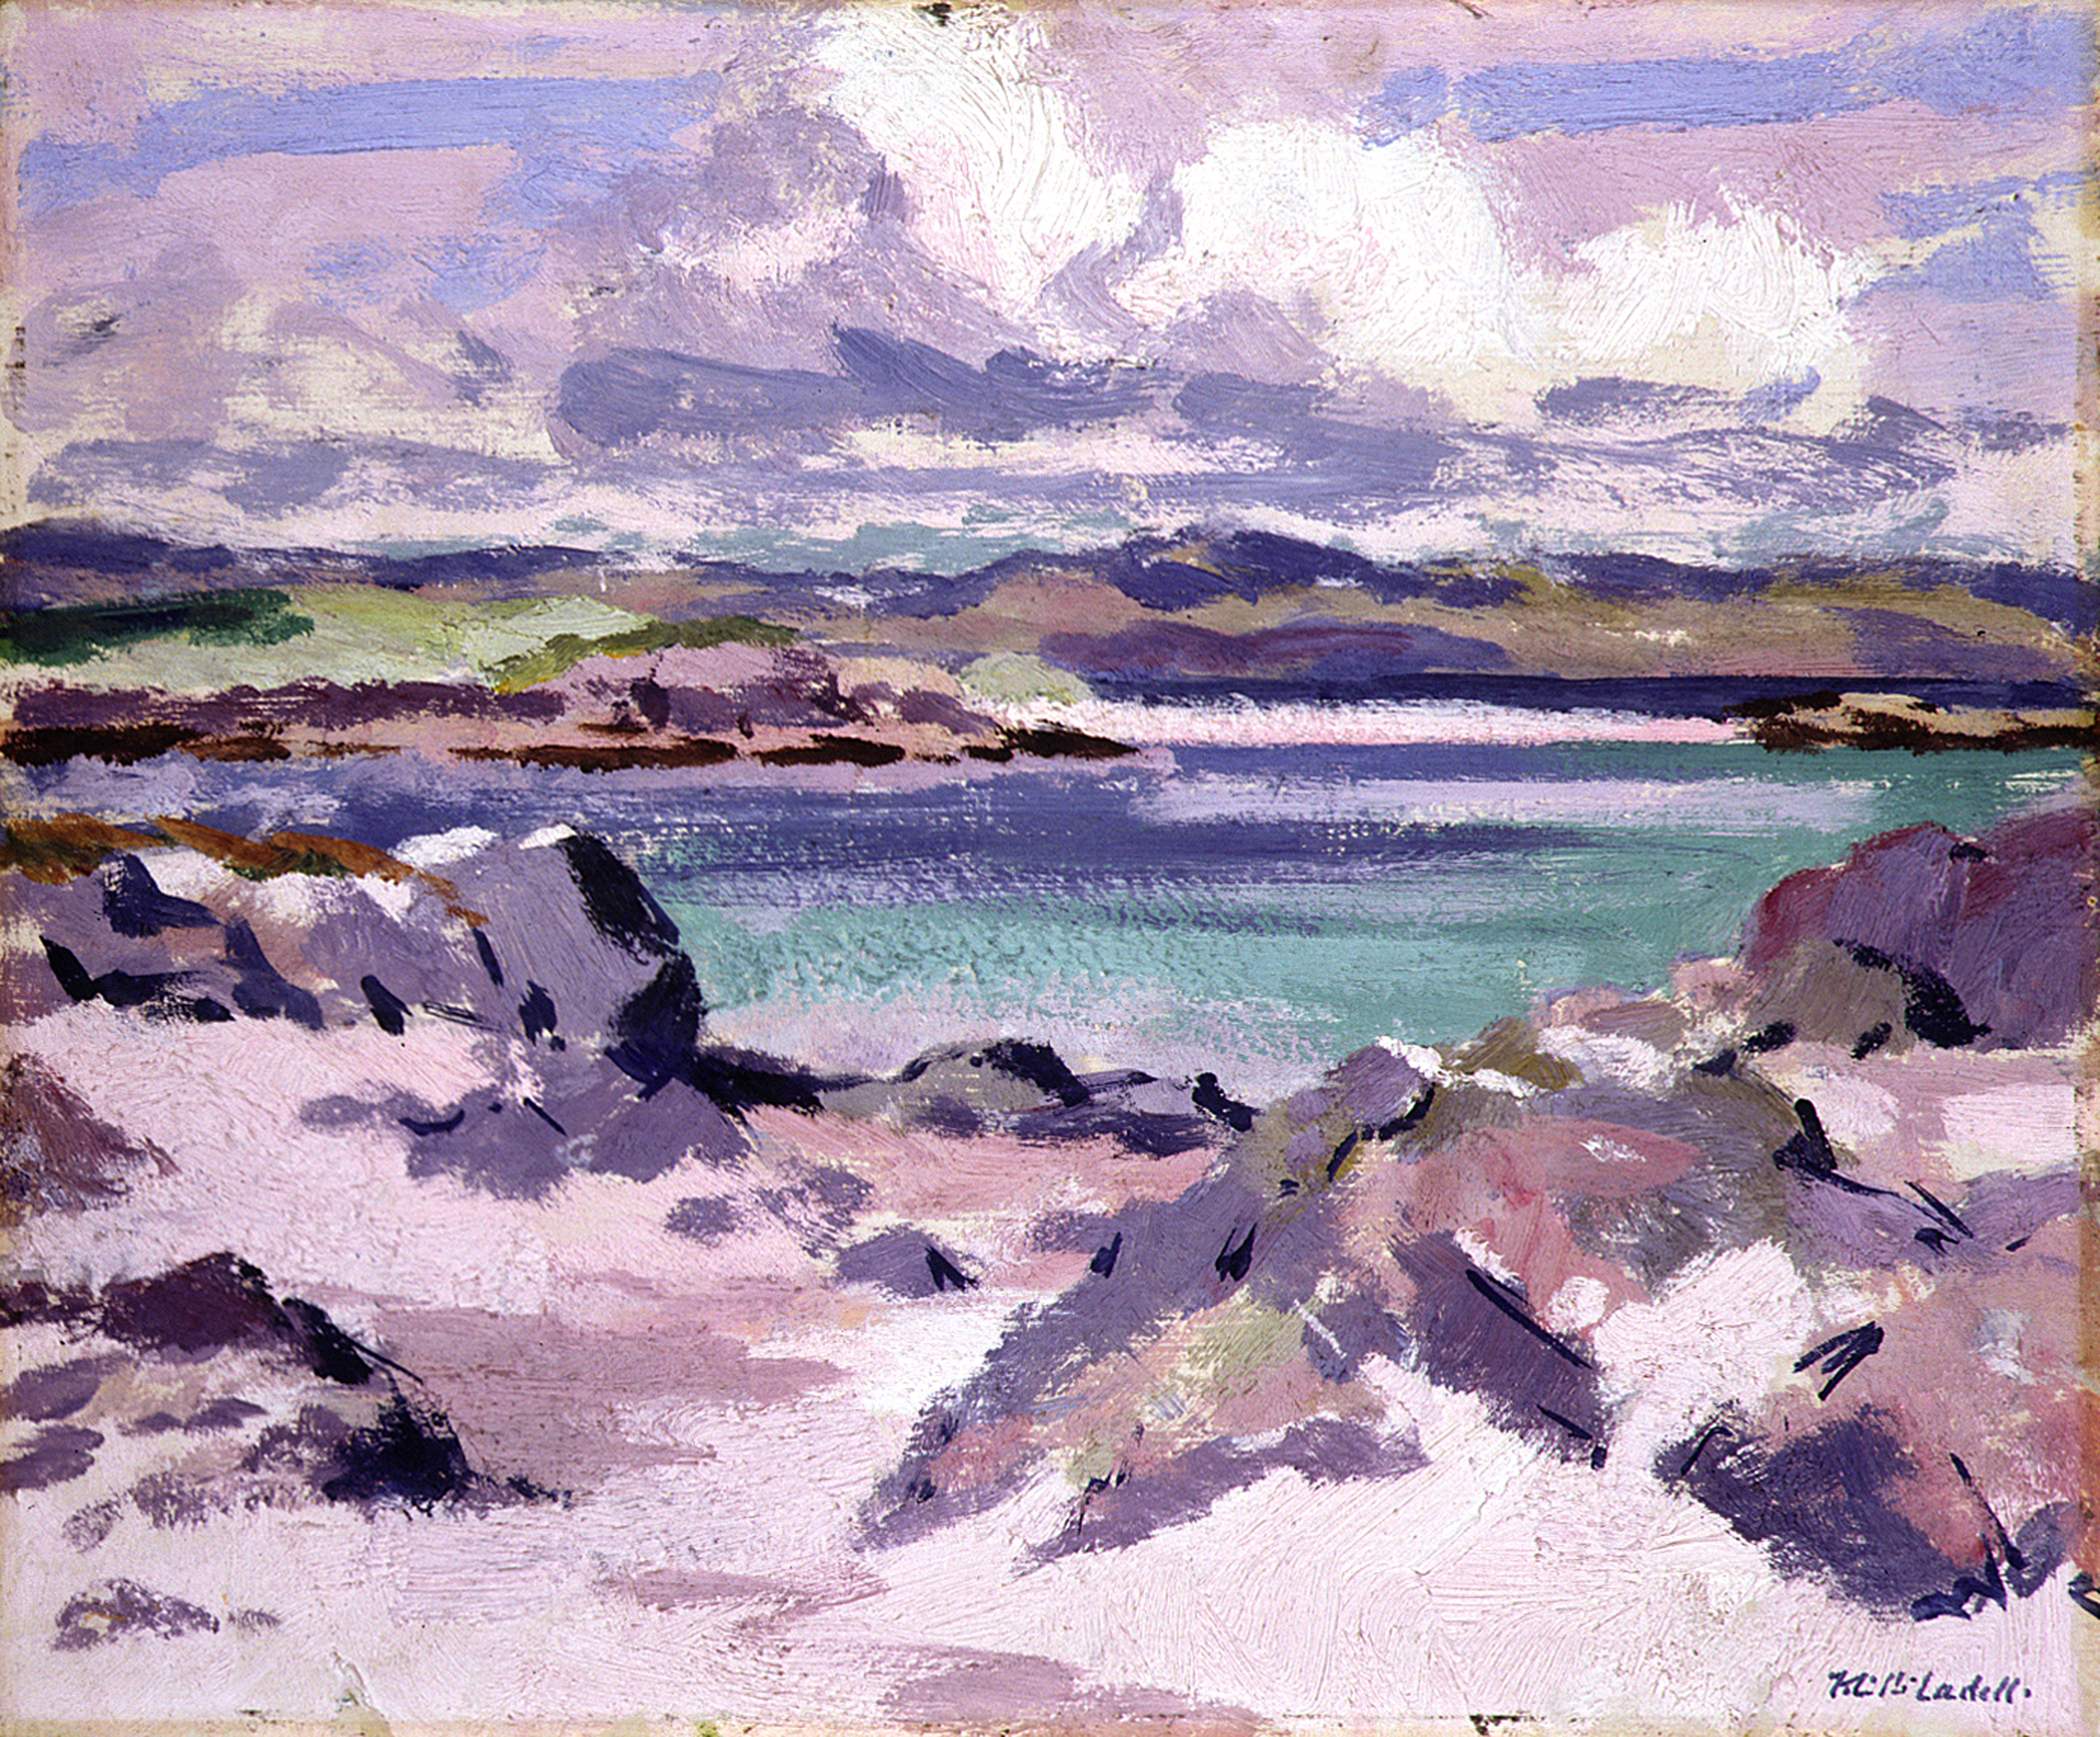 Iona by Cadell.